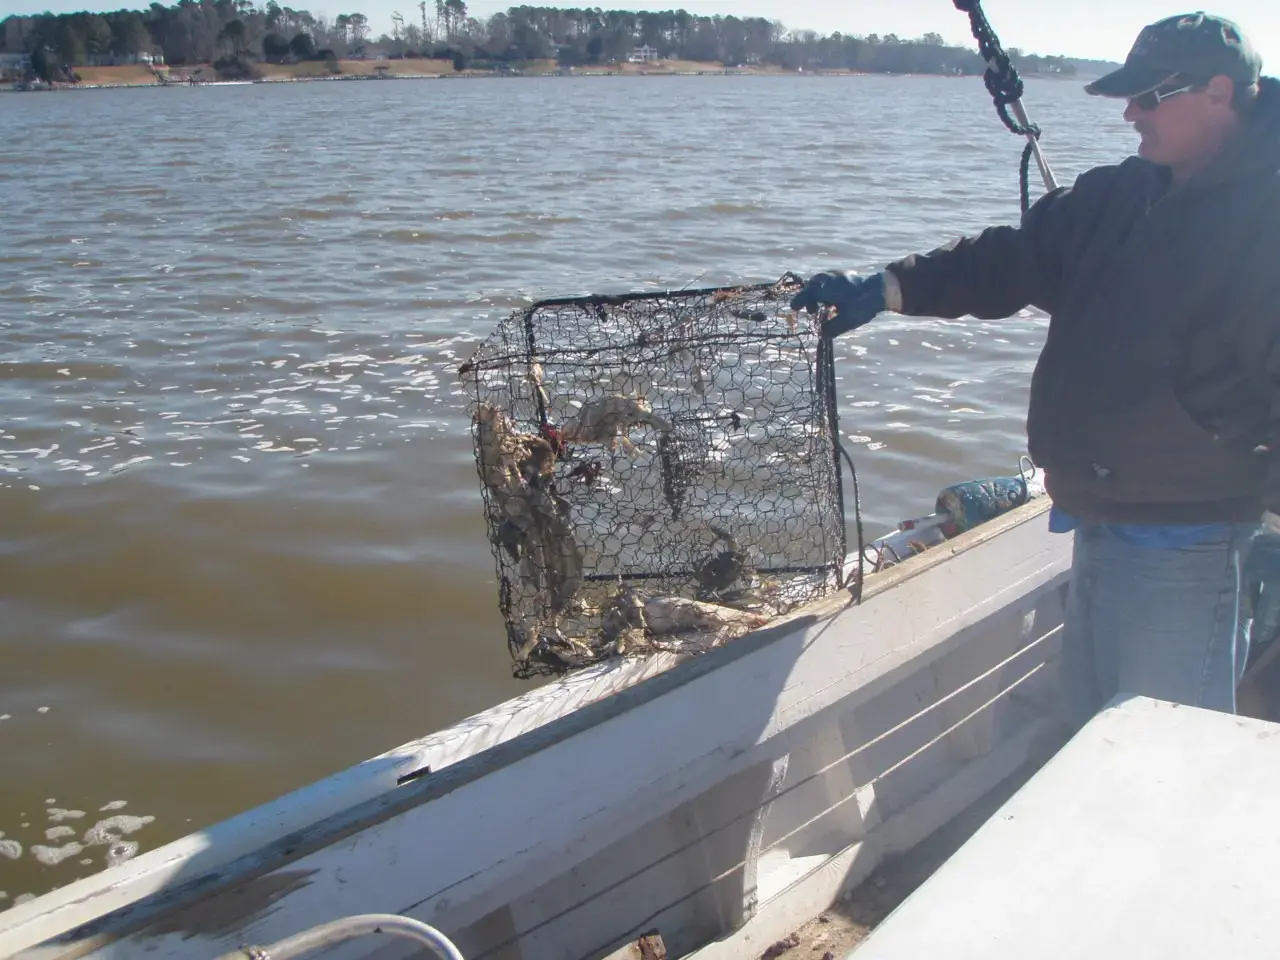 Reducing Bycatch Mortality in Crab Pots in Virgina